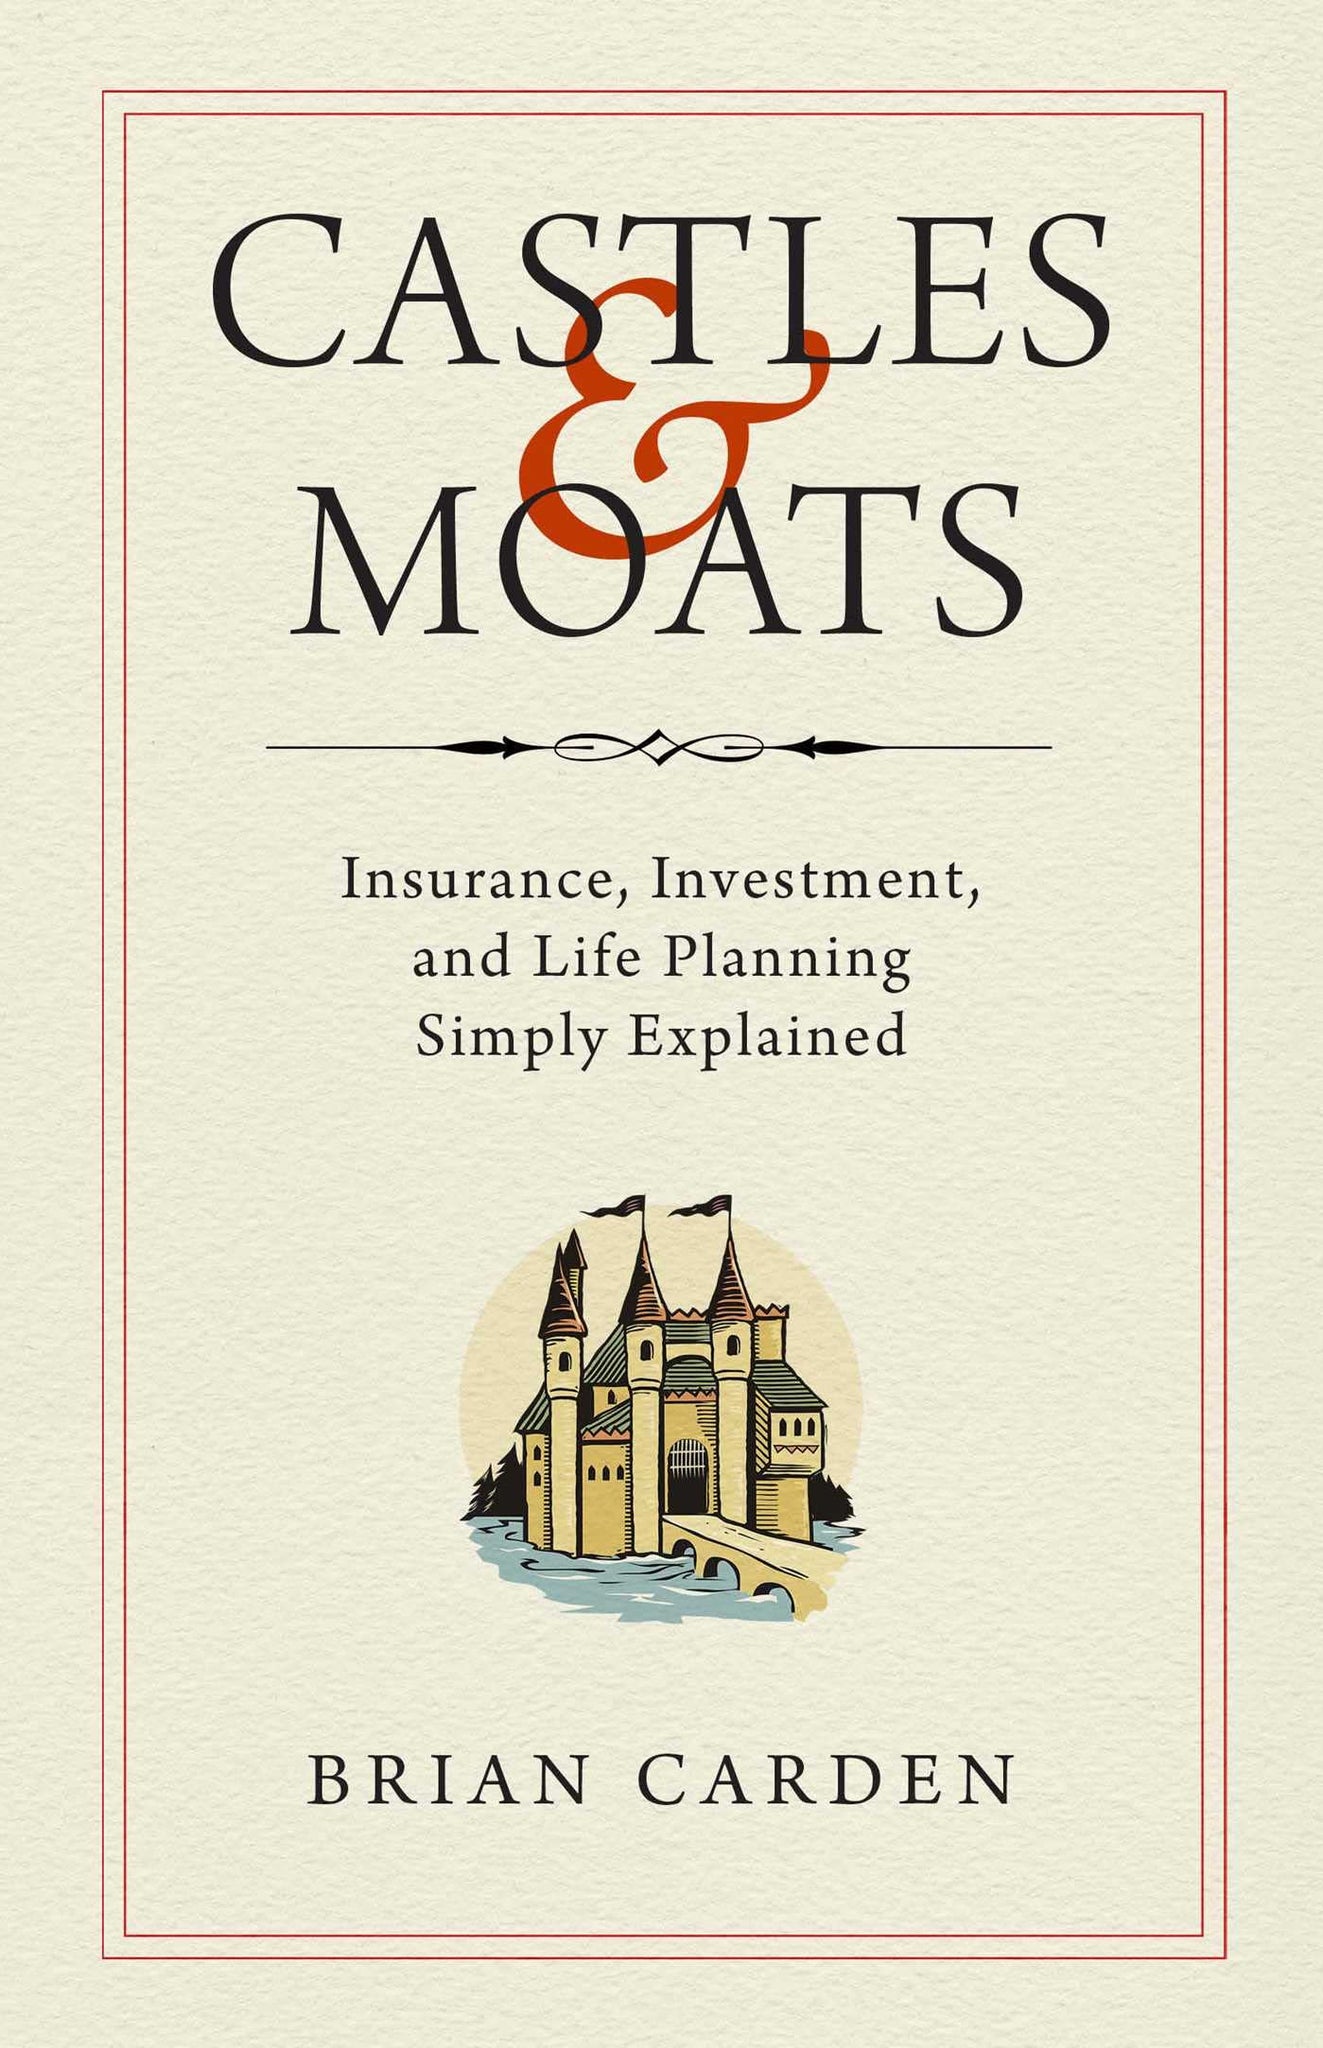 Castles and Moats: Insurance, Investment, and Life Planning Simply Explained